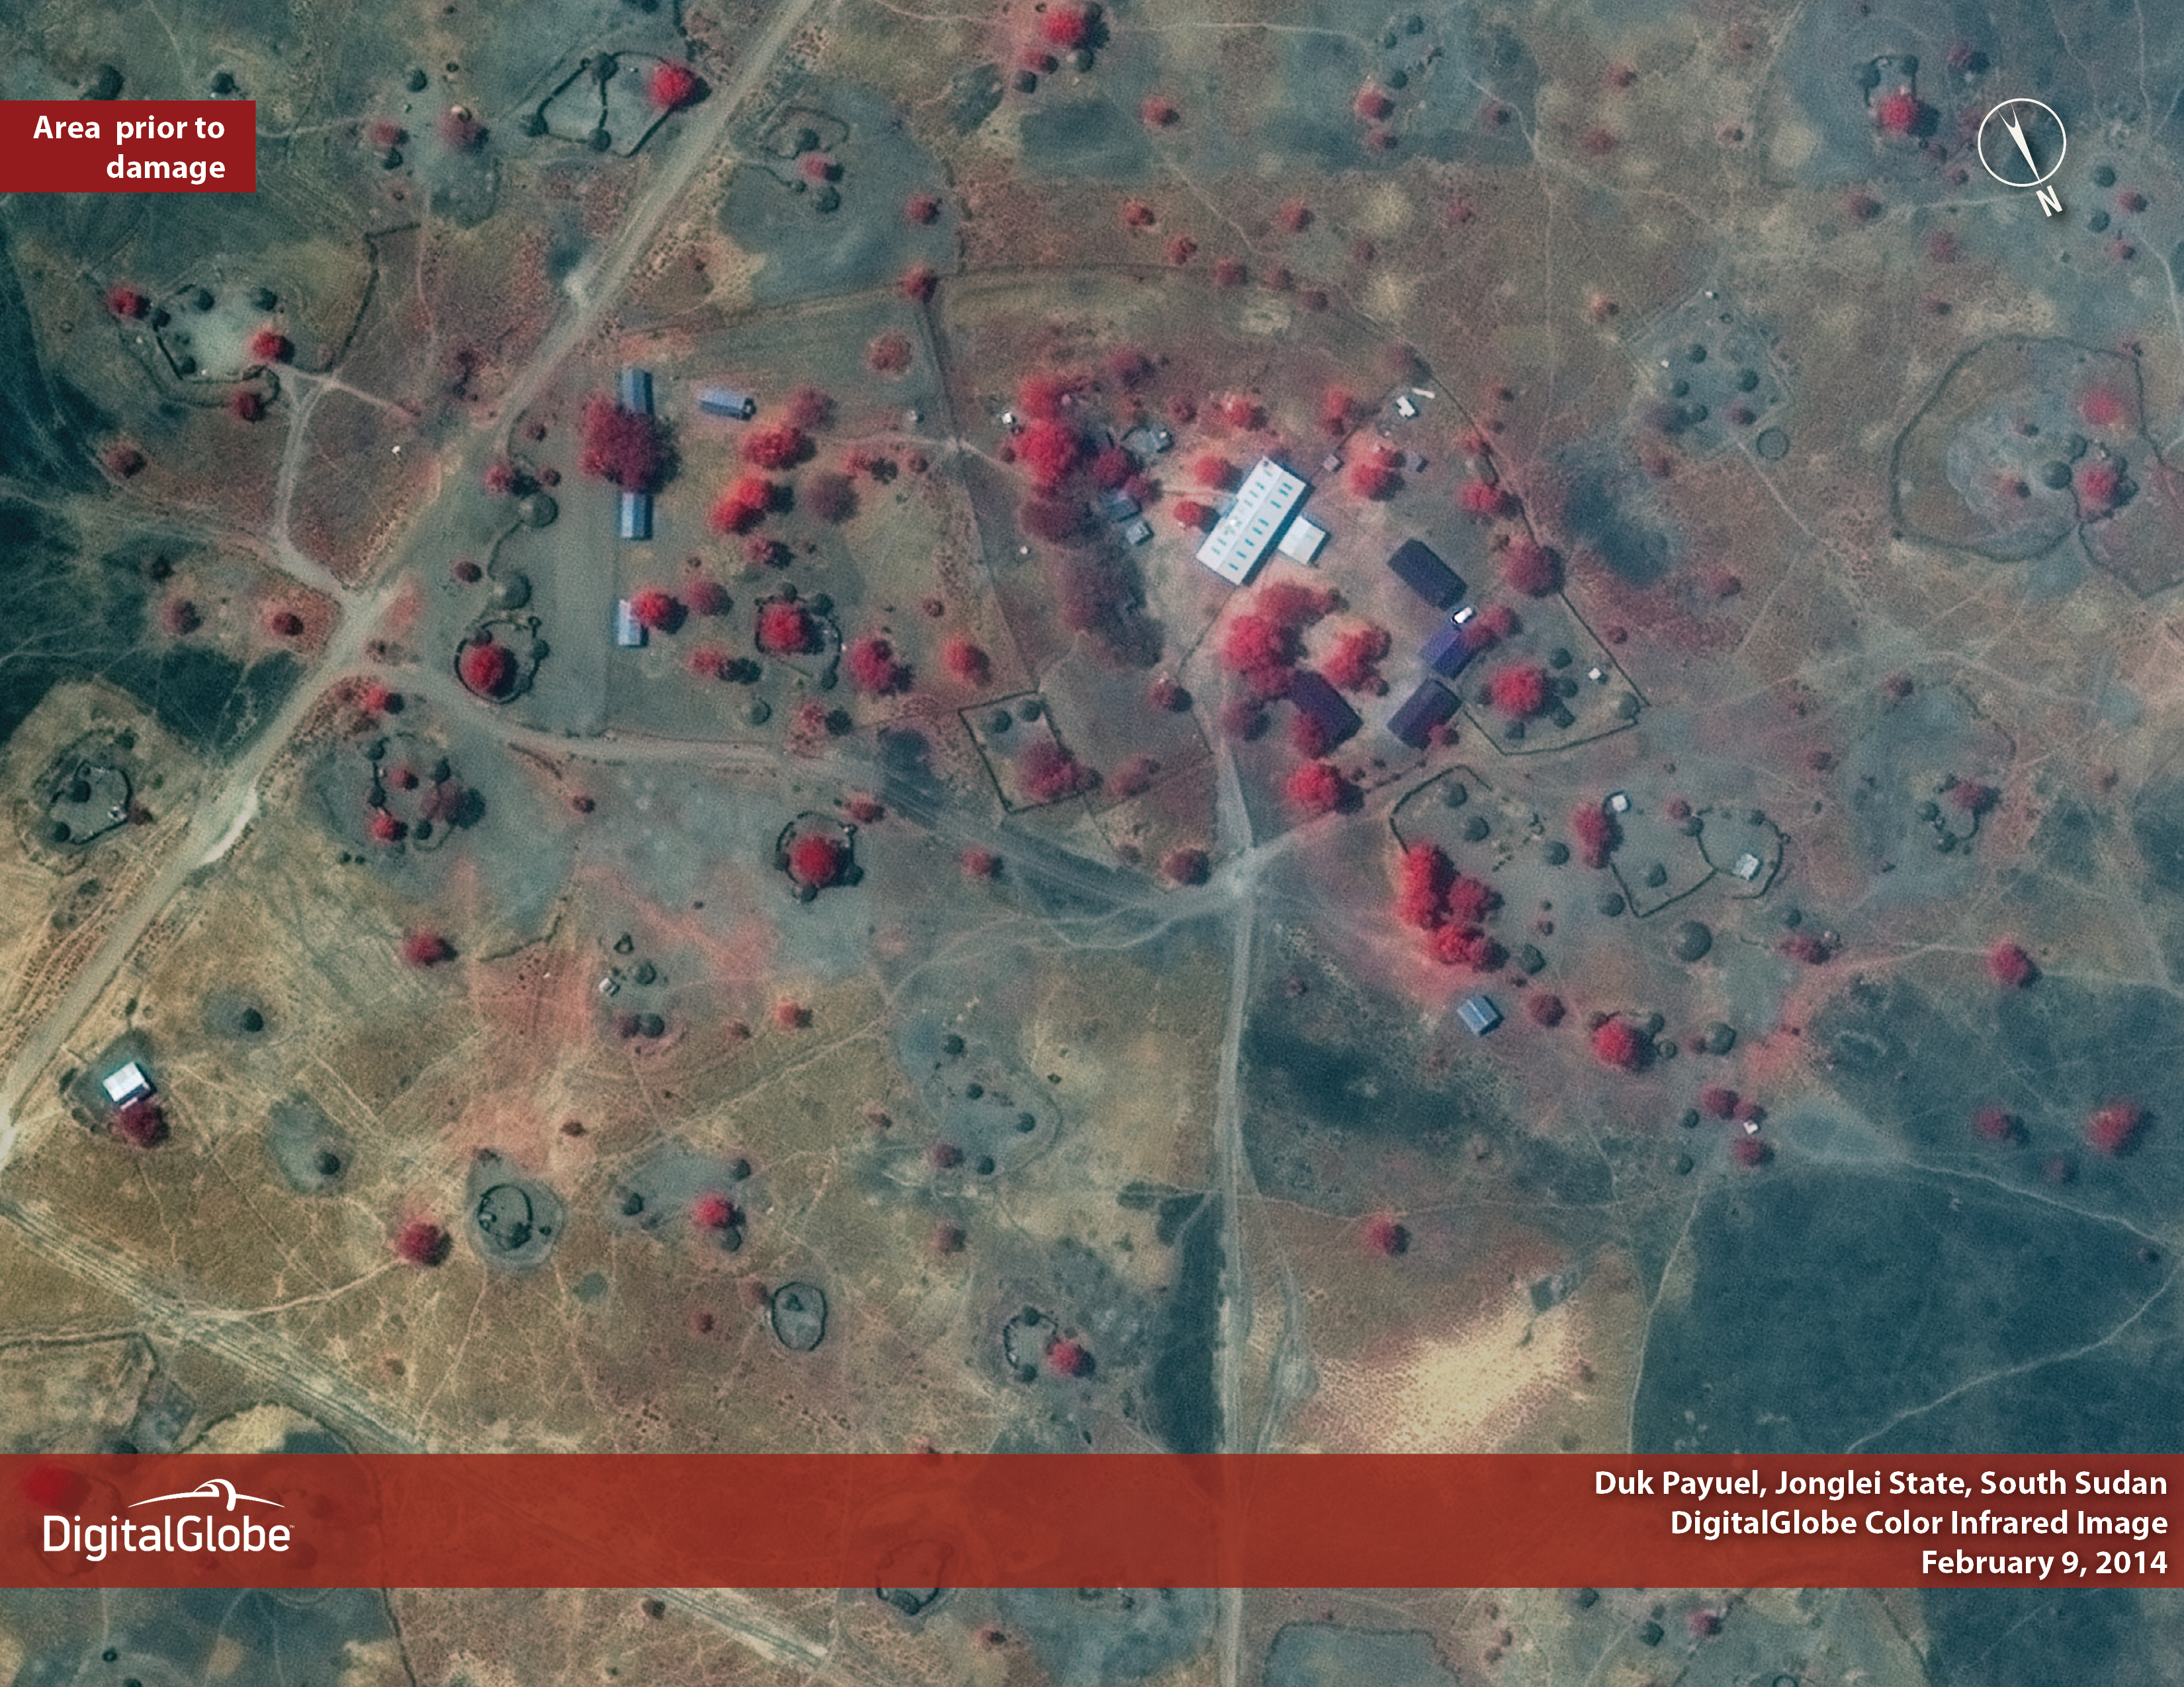 Image 2: Though the total number of damaged or destroyed homes in Duk is unknown, at least 10 huts were burned in the area reviewed by DigitalGlobe analysts, who also identified buildings that had been looted between February 9, 2014 and March 5, 2014.